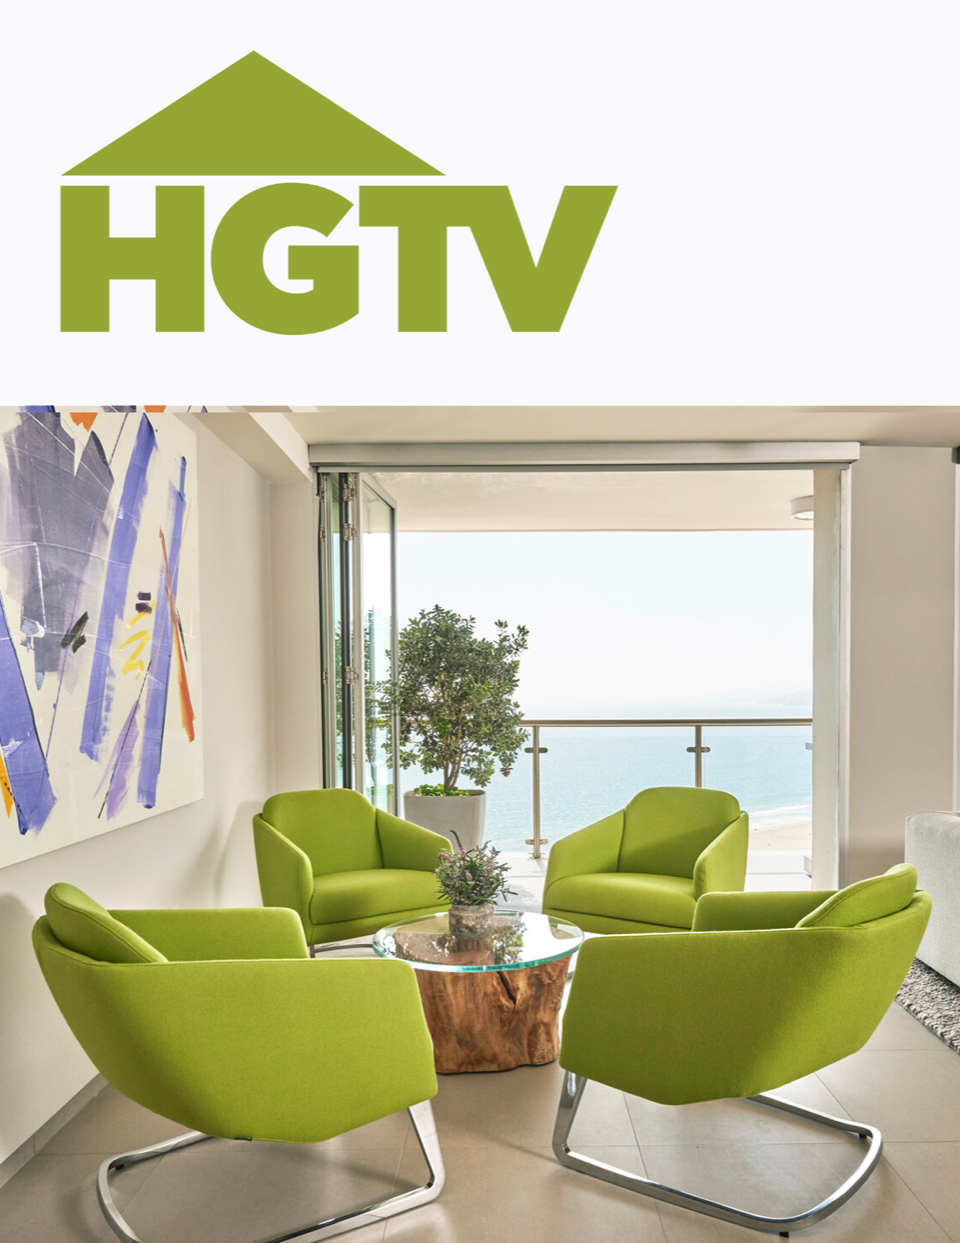  An HGTV article on live-edge furniture featuring interior design projects  by Sarah Barnard Design.  